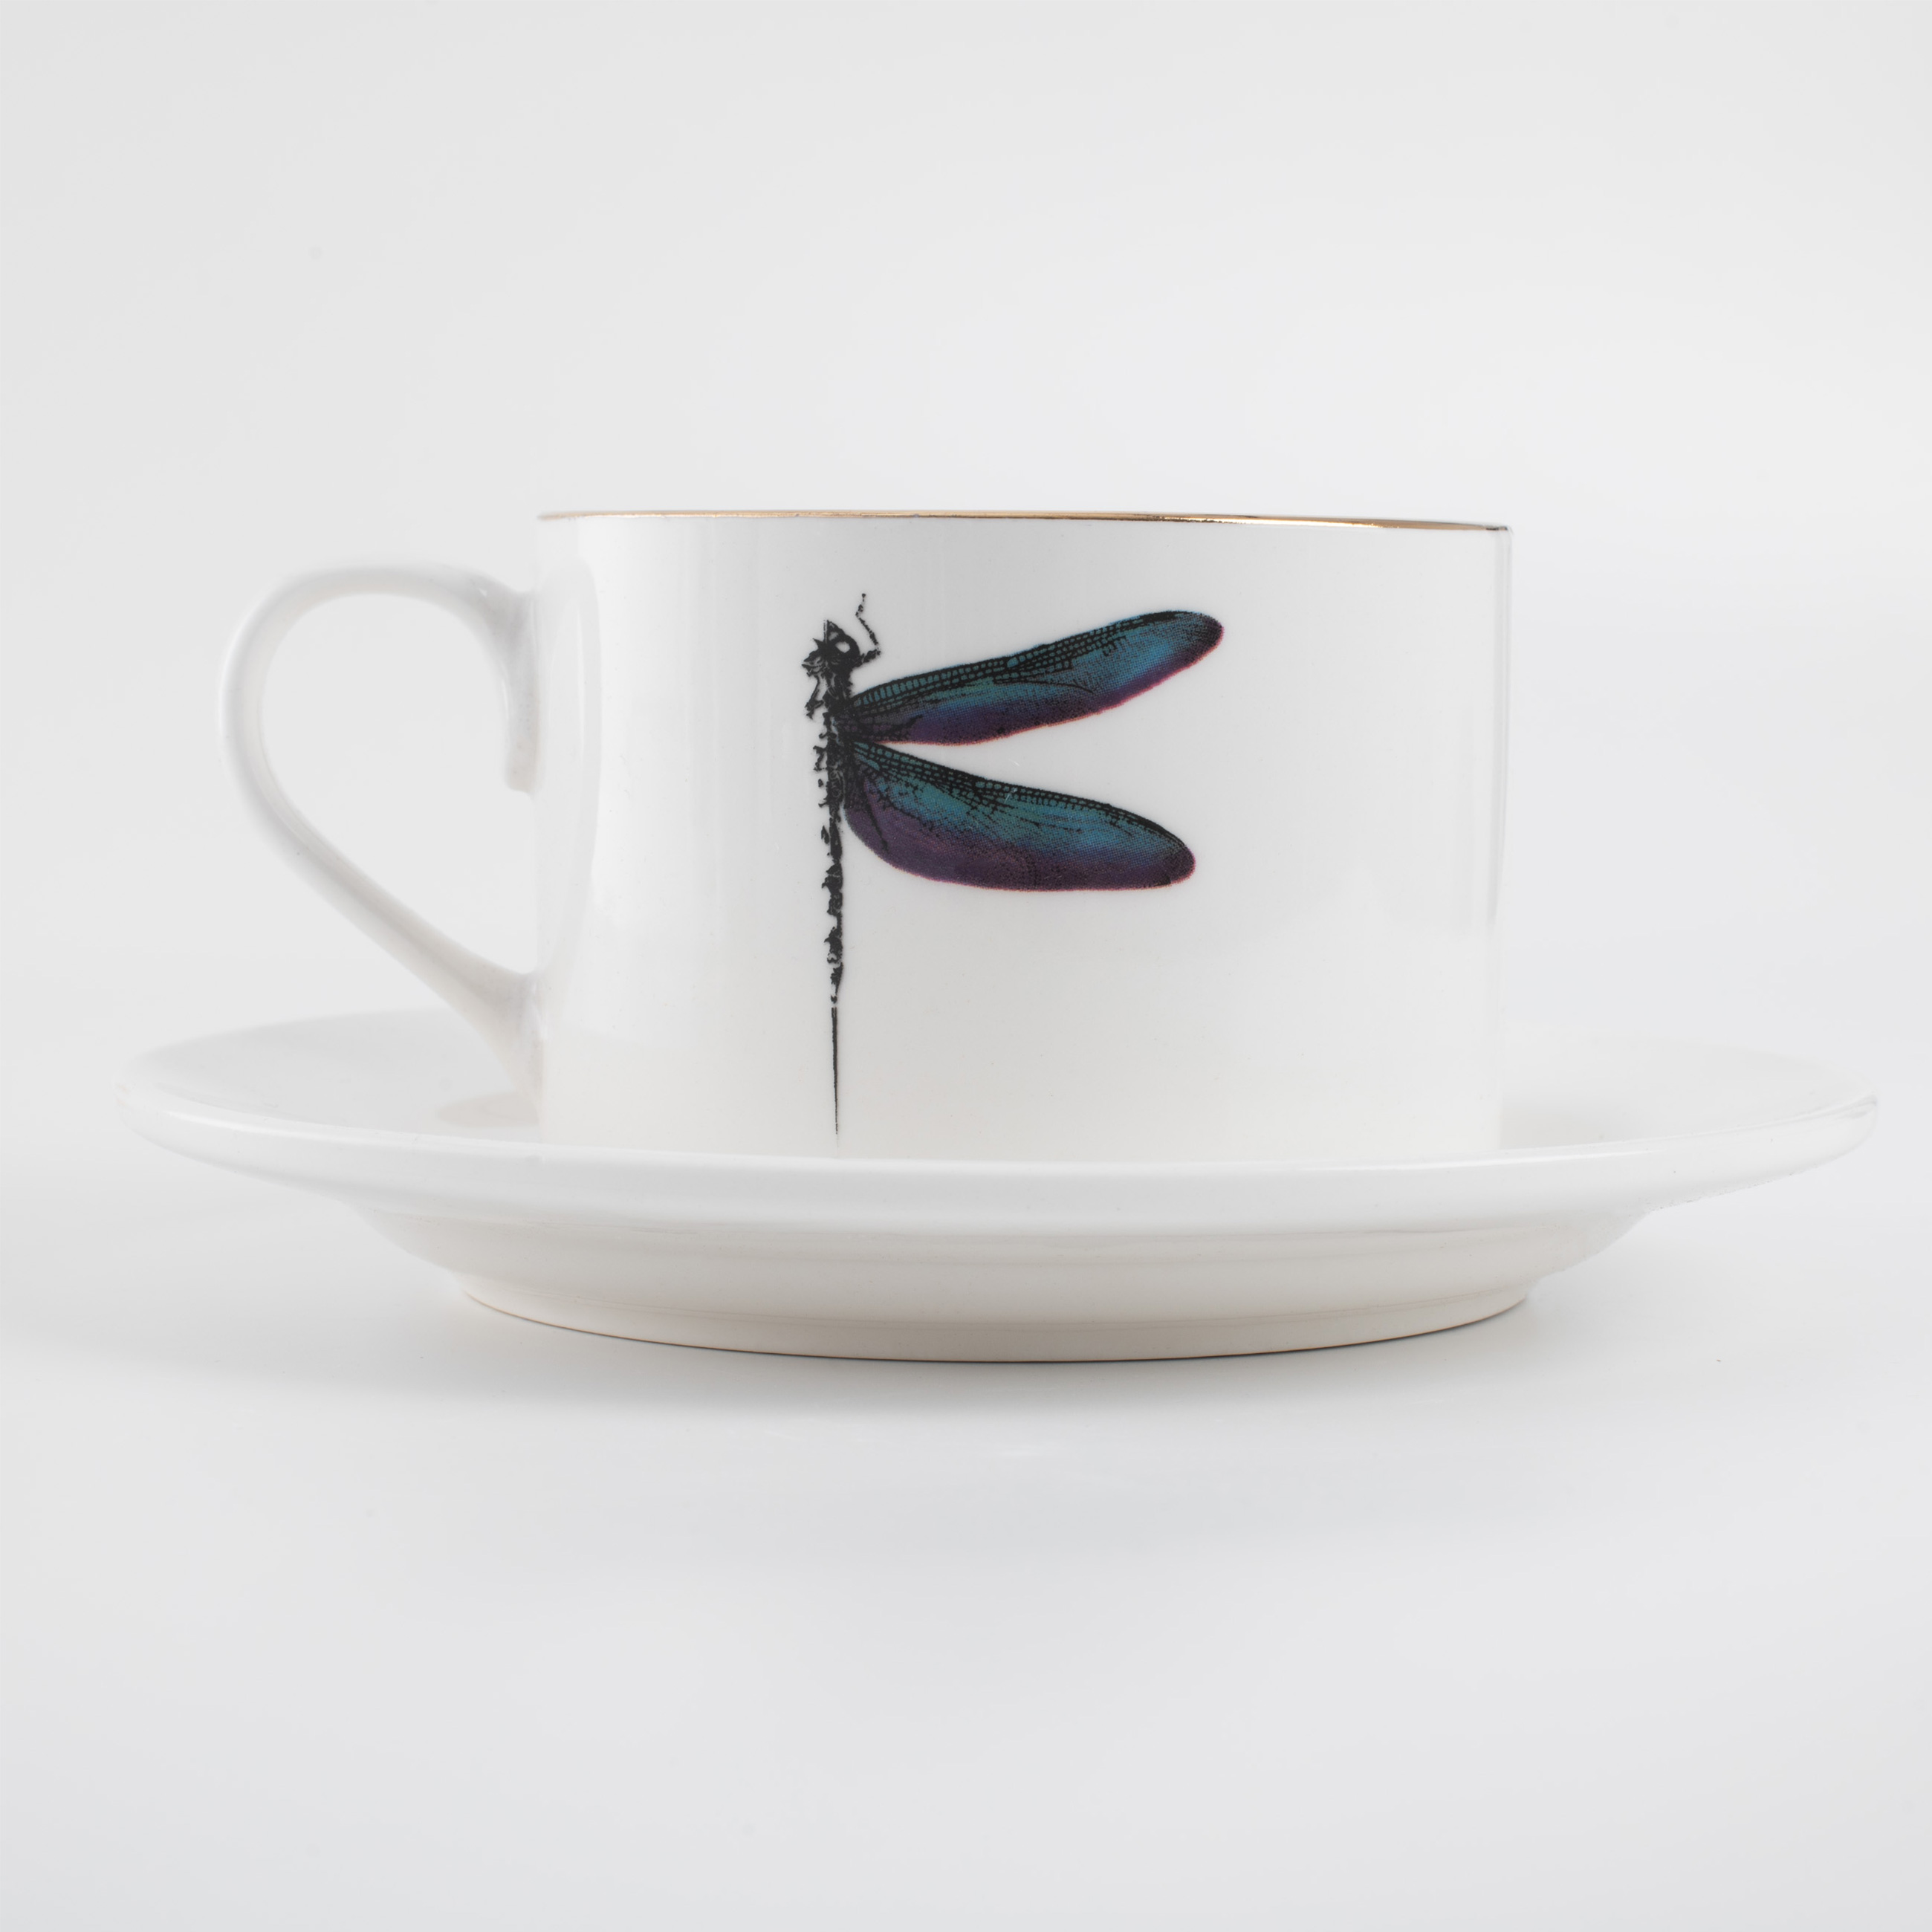 Tea pair, 1 person, 2 items, 220 ml, porcelain N, golden edging, Colored dragonfly, Symphony изображение № 3